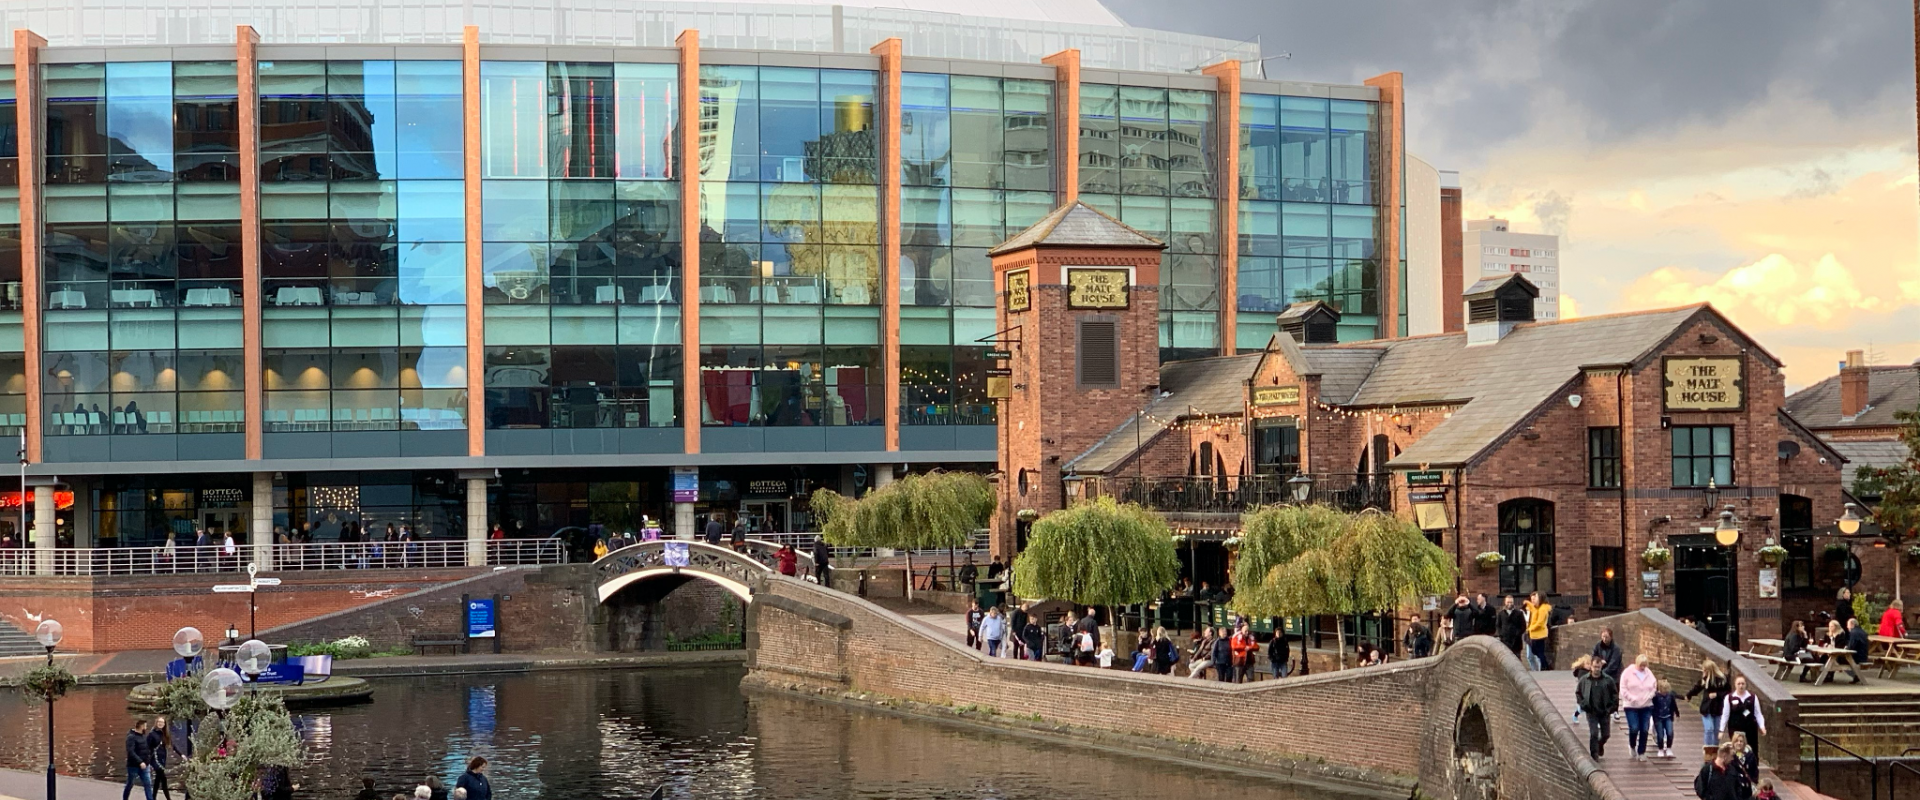 Buildings in Birmingham, England next to a canel